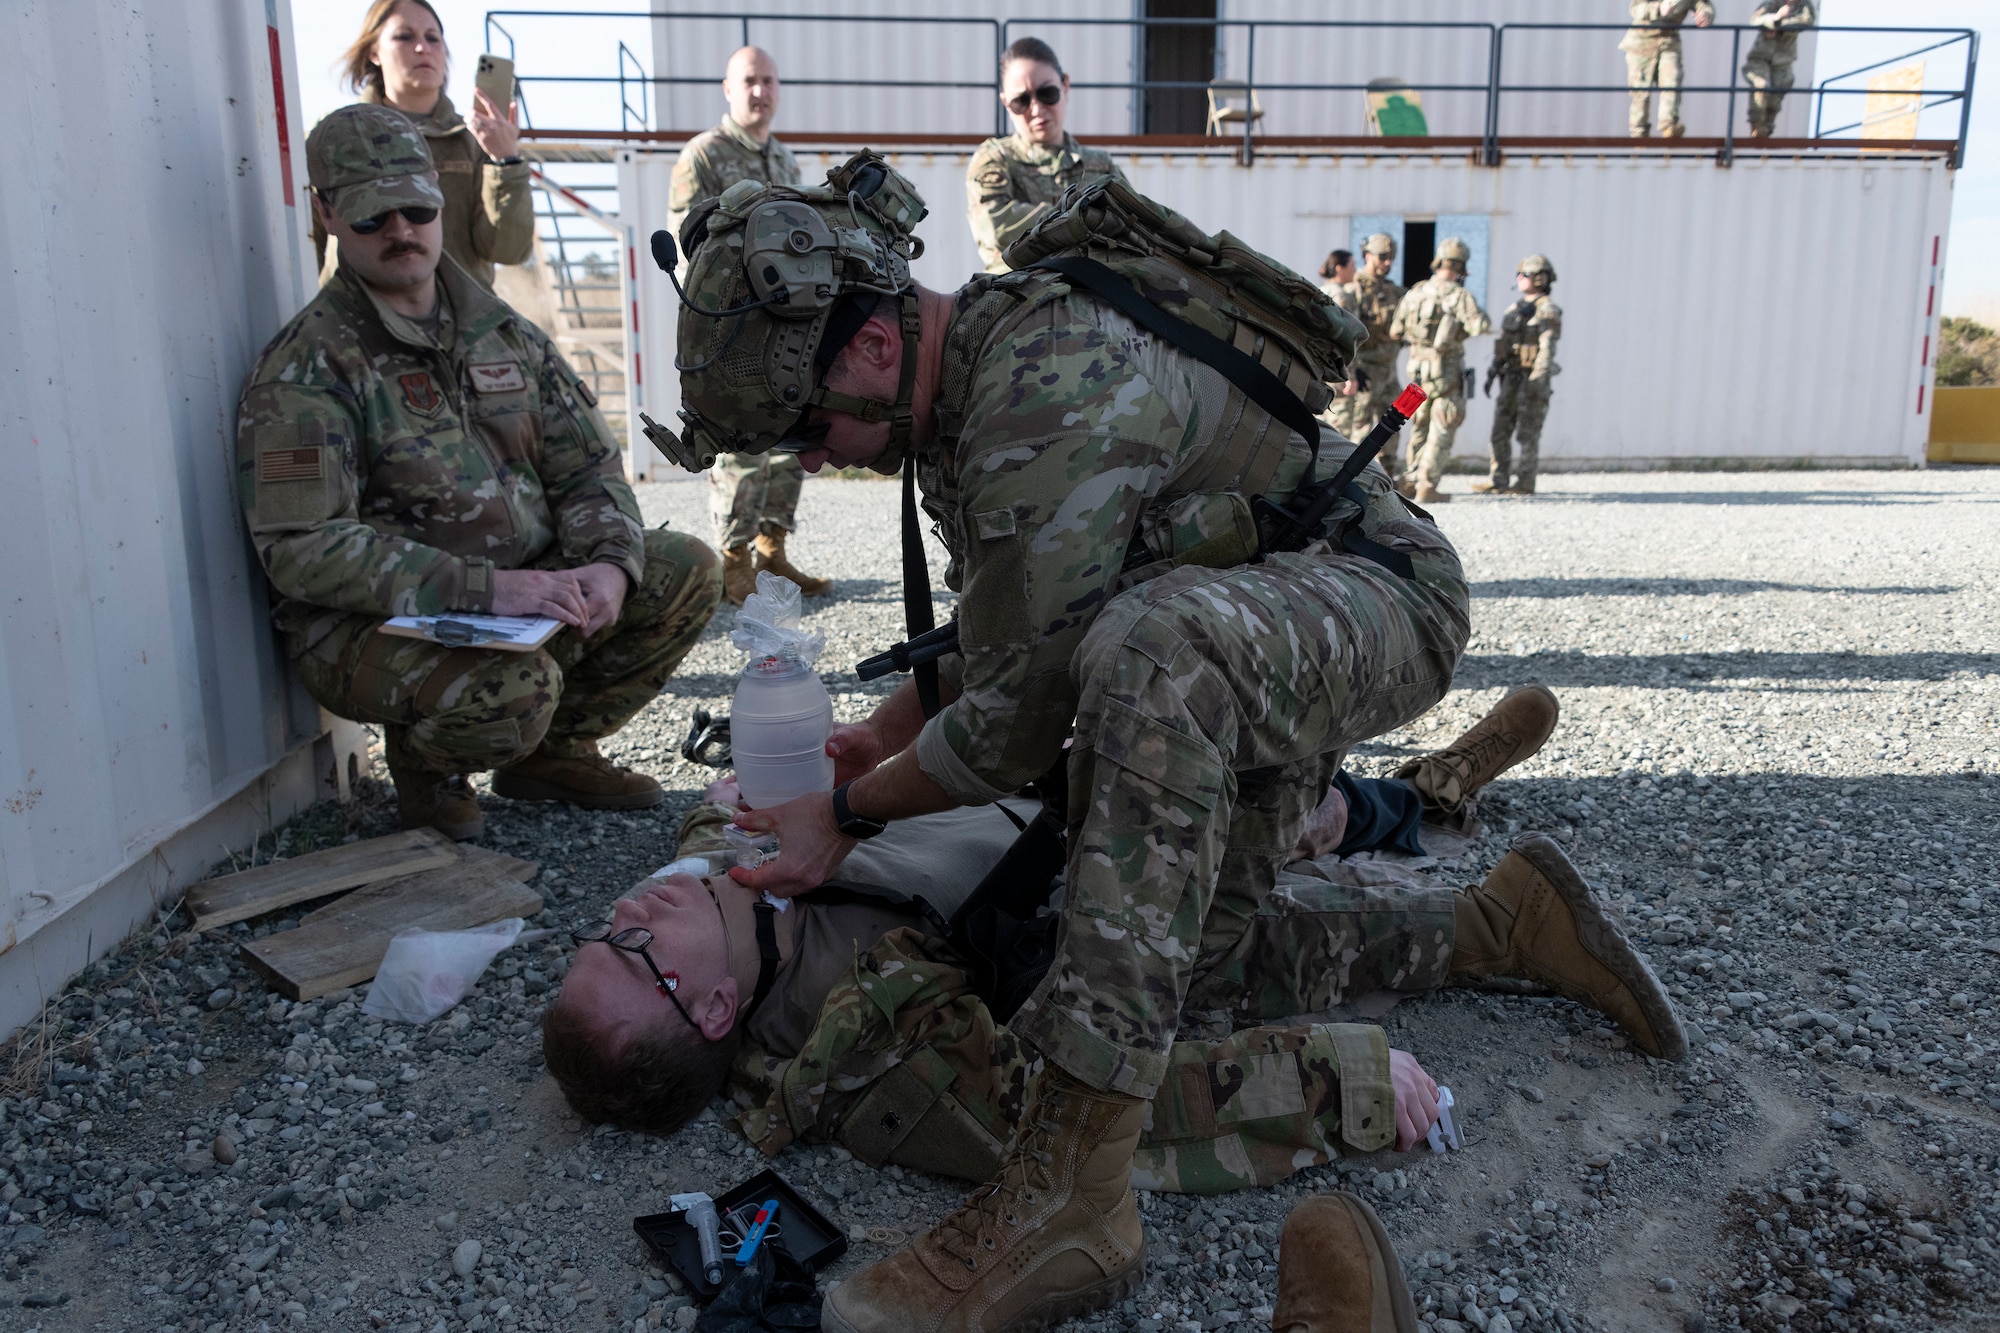 Airmen attend to simulated victims.